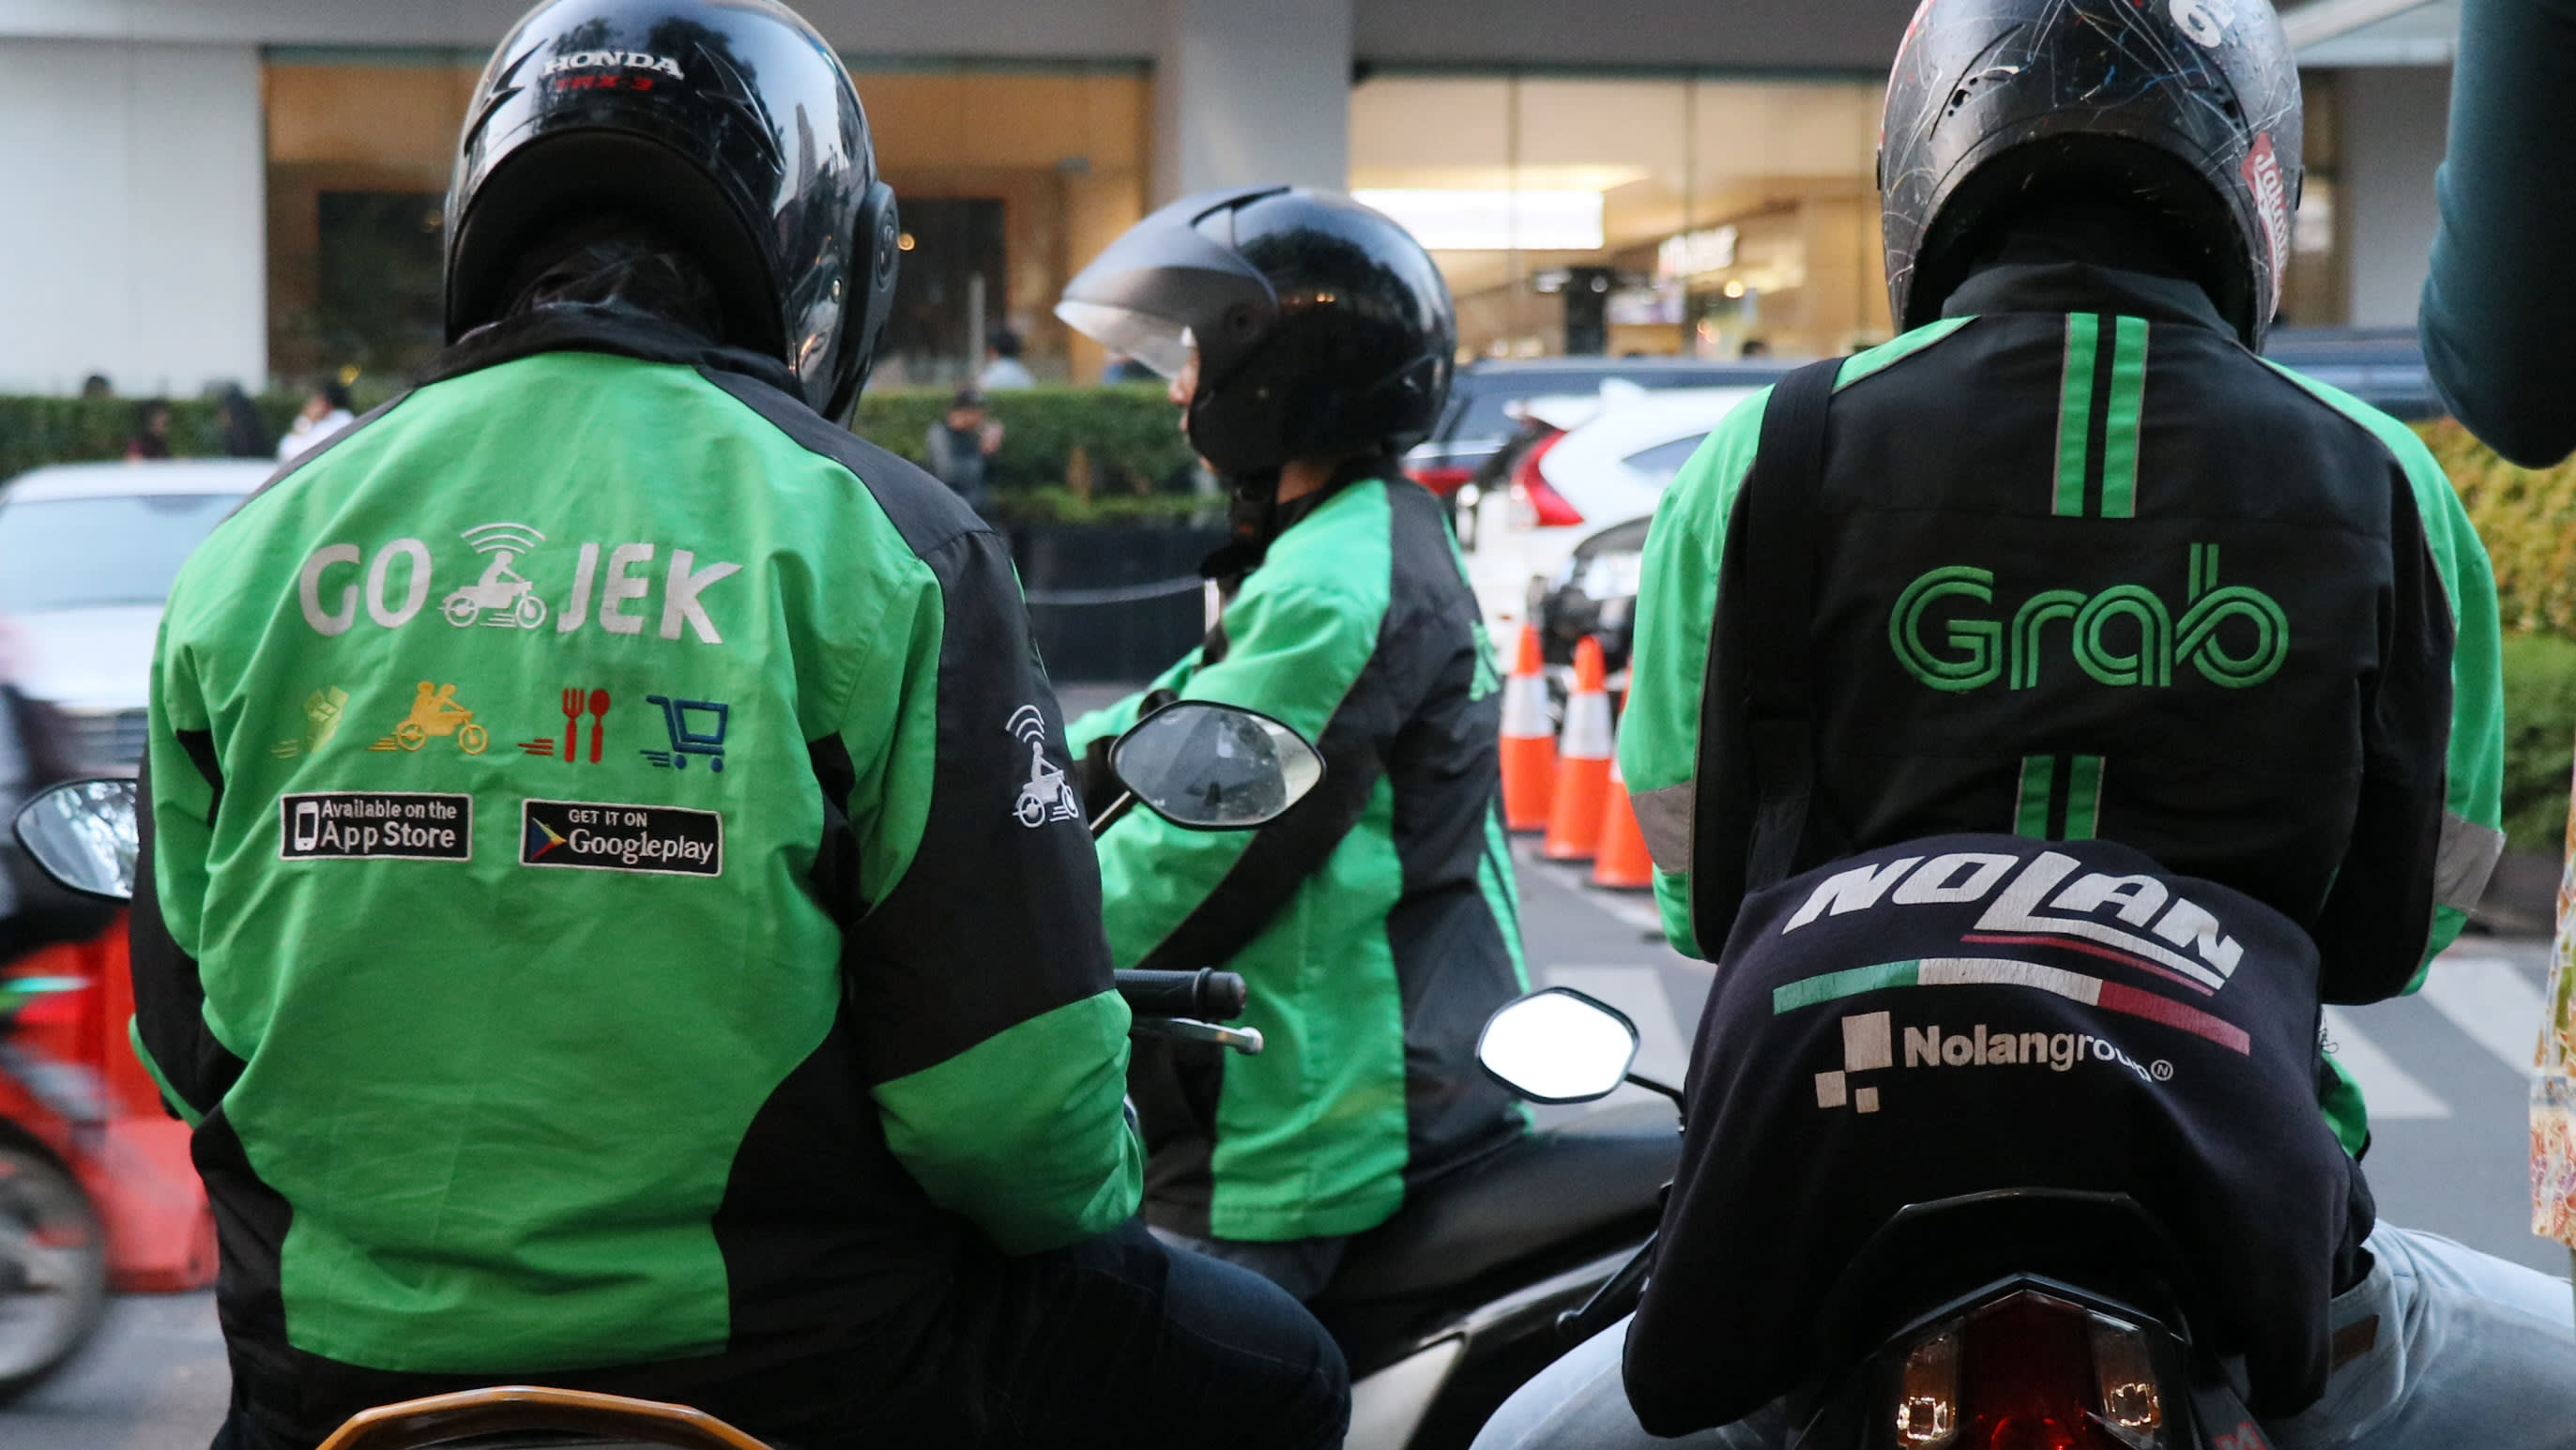 LTA: Street hail services possible for Go-Jek and Grab soon